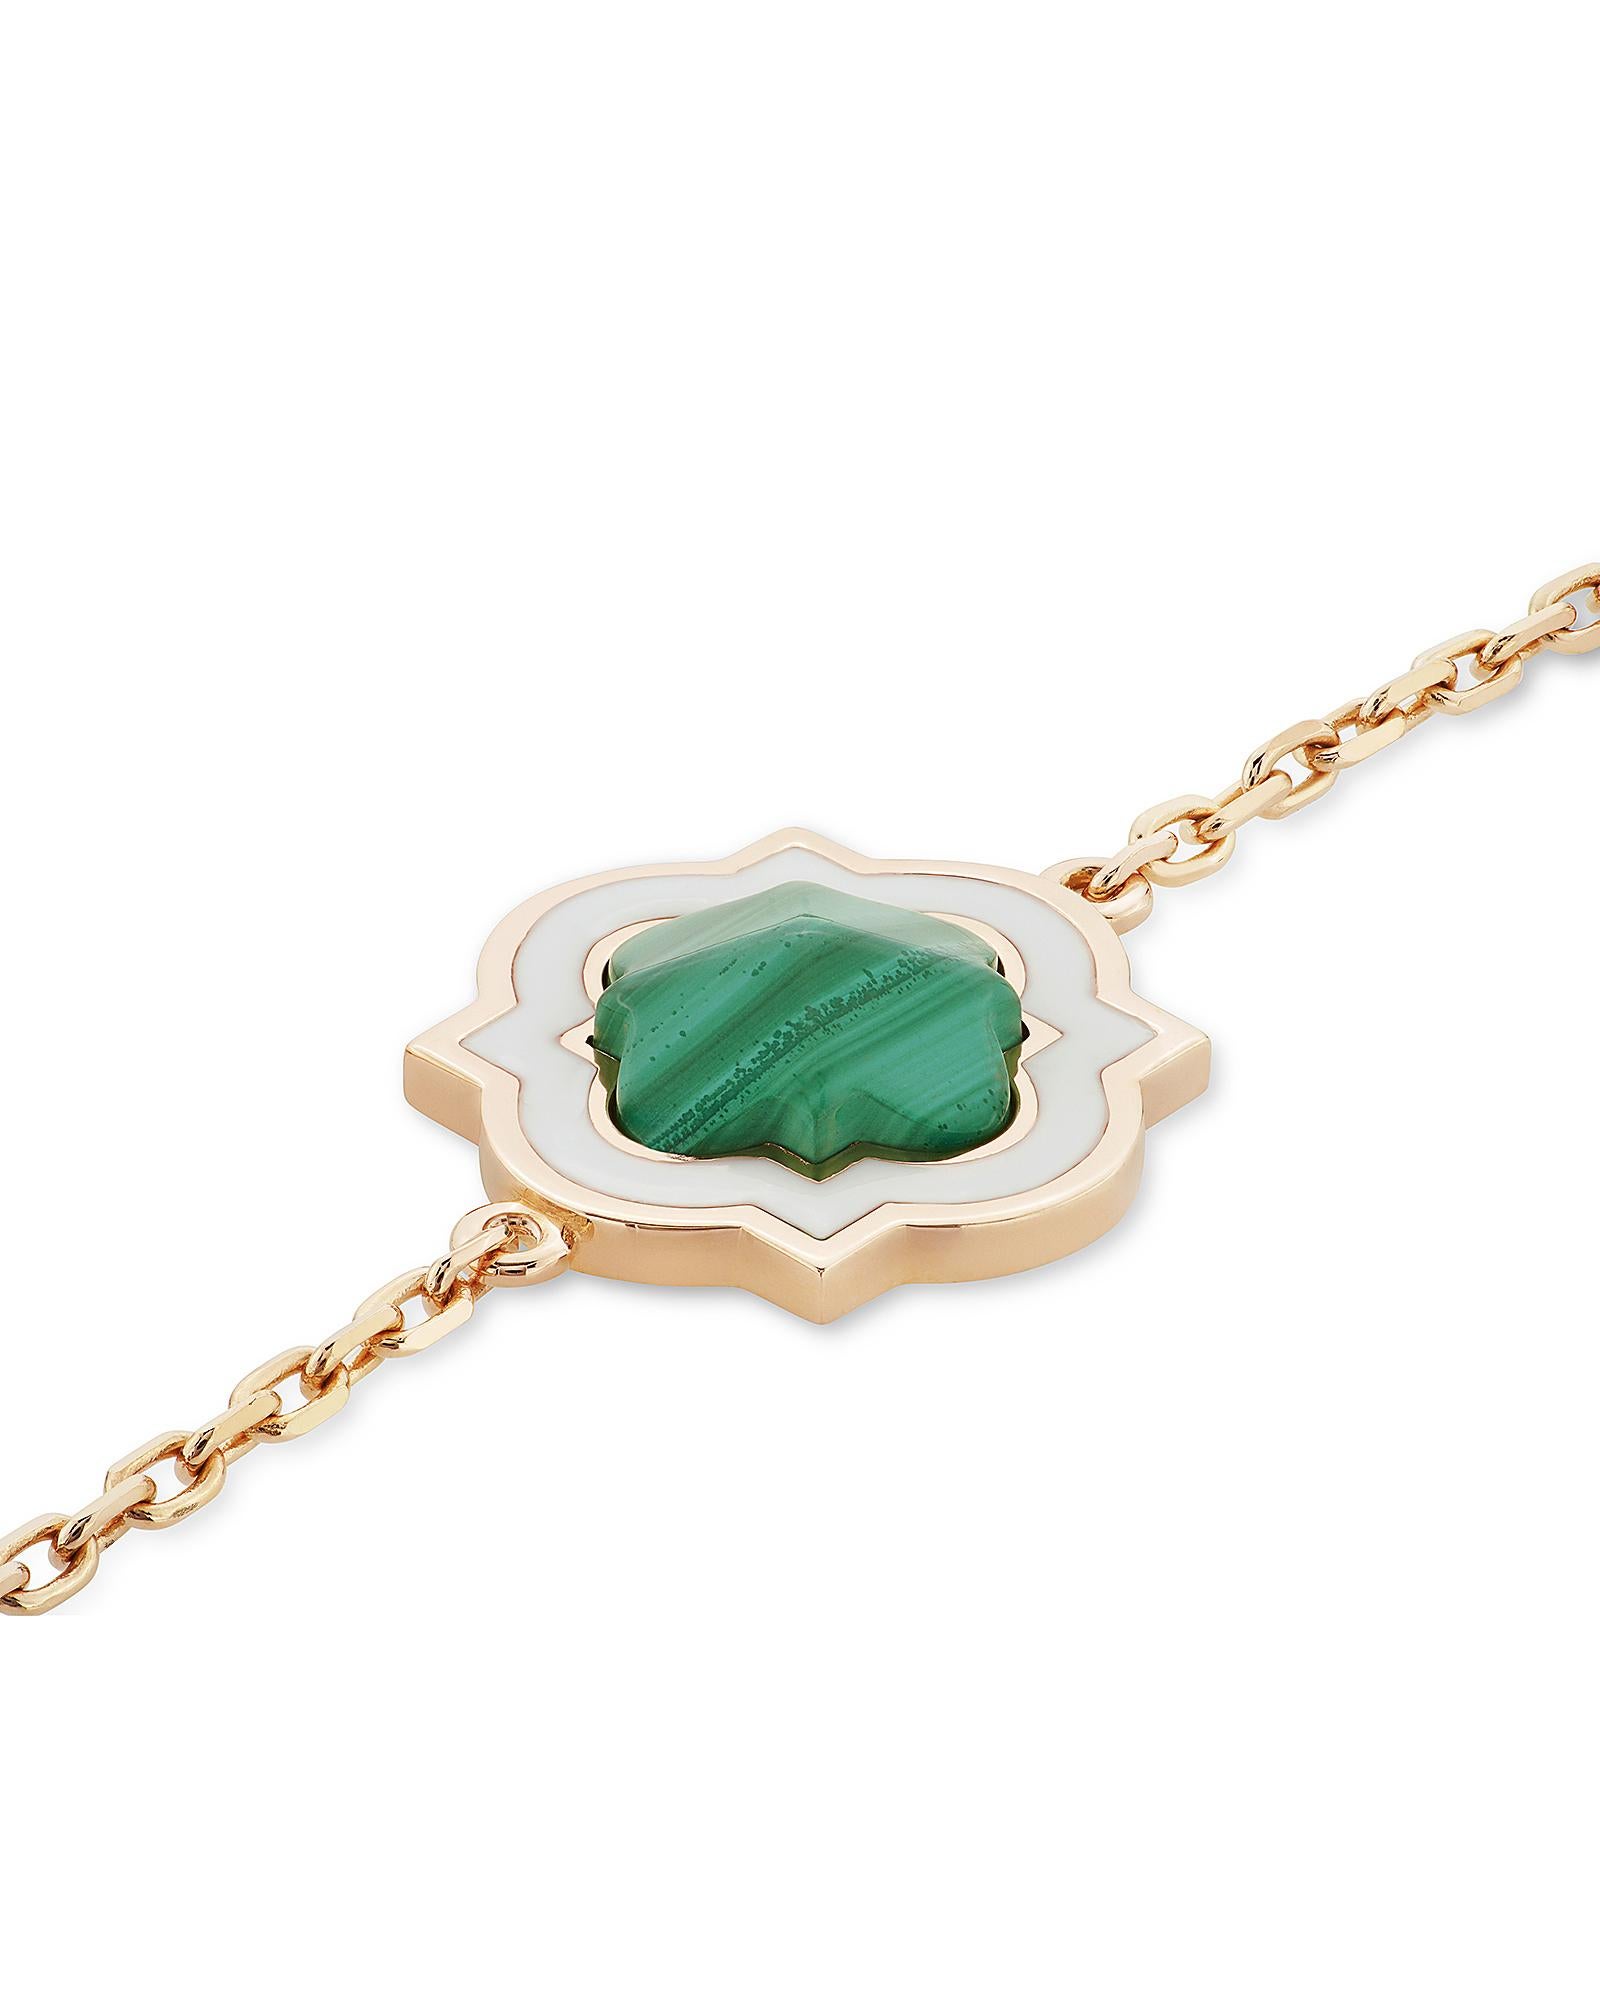 This necklace is a hymn to pure femininity, presents a deeply elegant attitude and a design characterized by a bold aesthetics. Made with 18 carat rose gold, malachite and diamonds, it is a refined tribute to the iconic symbol of the House. The